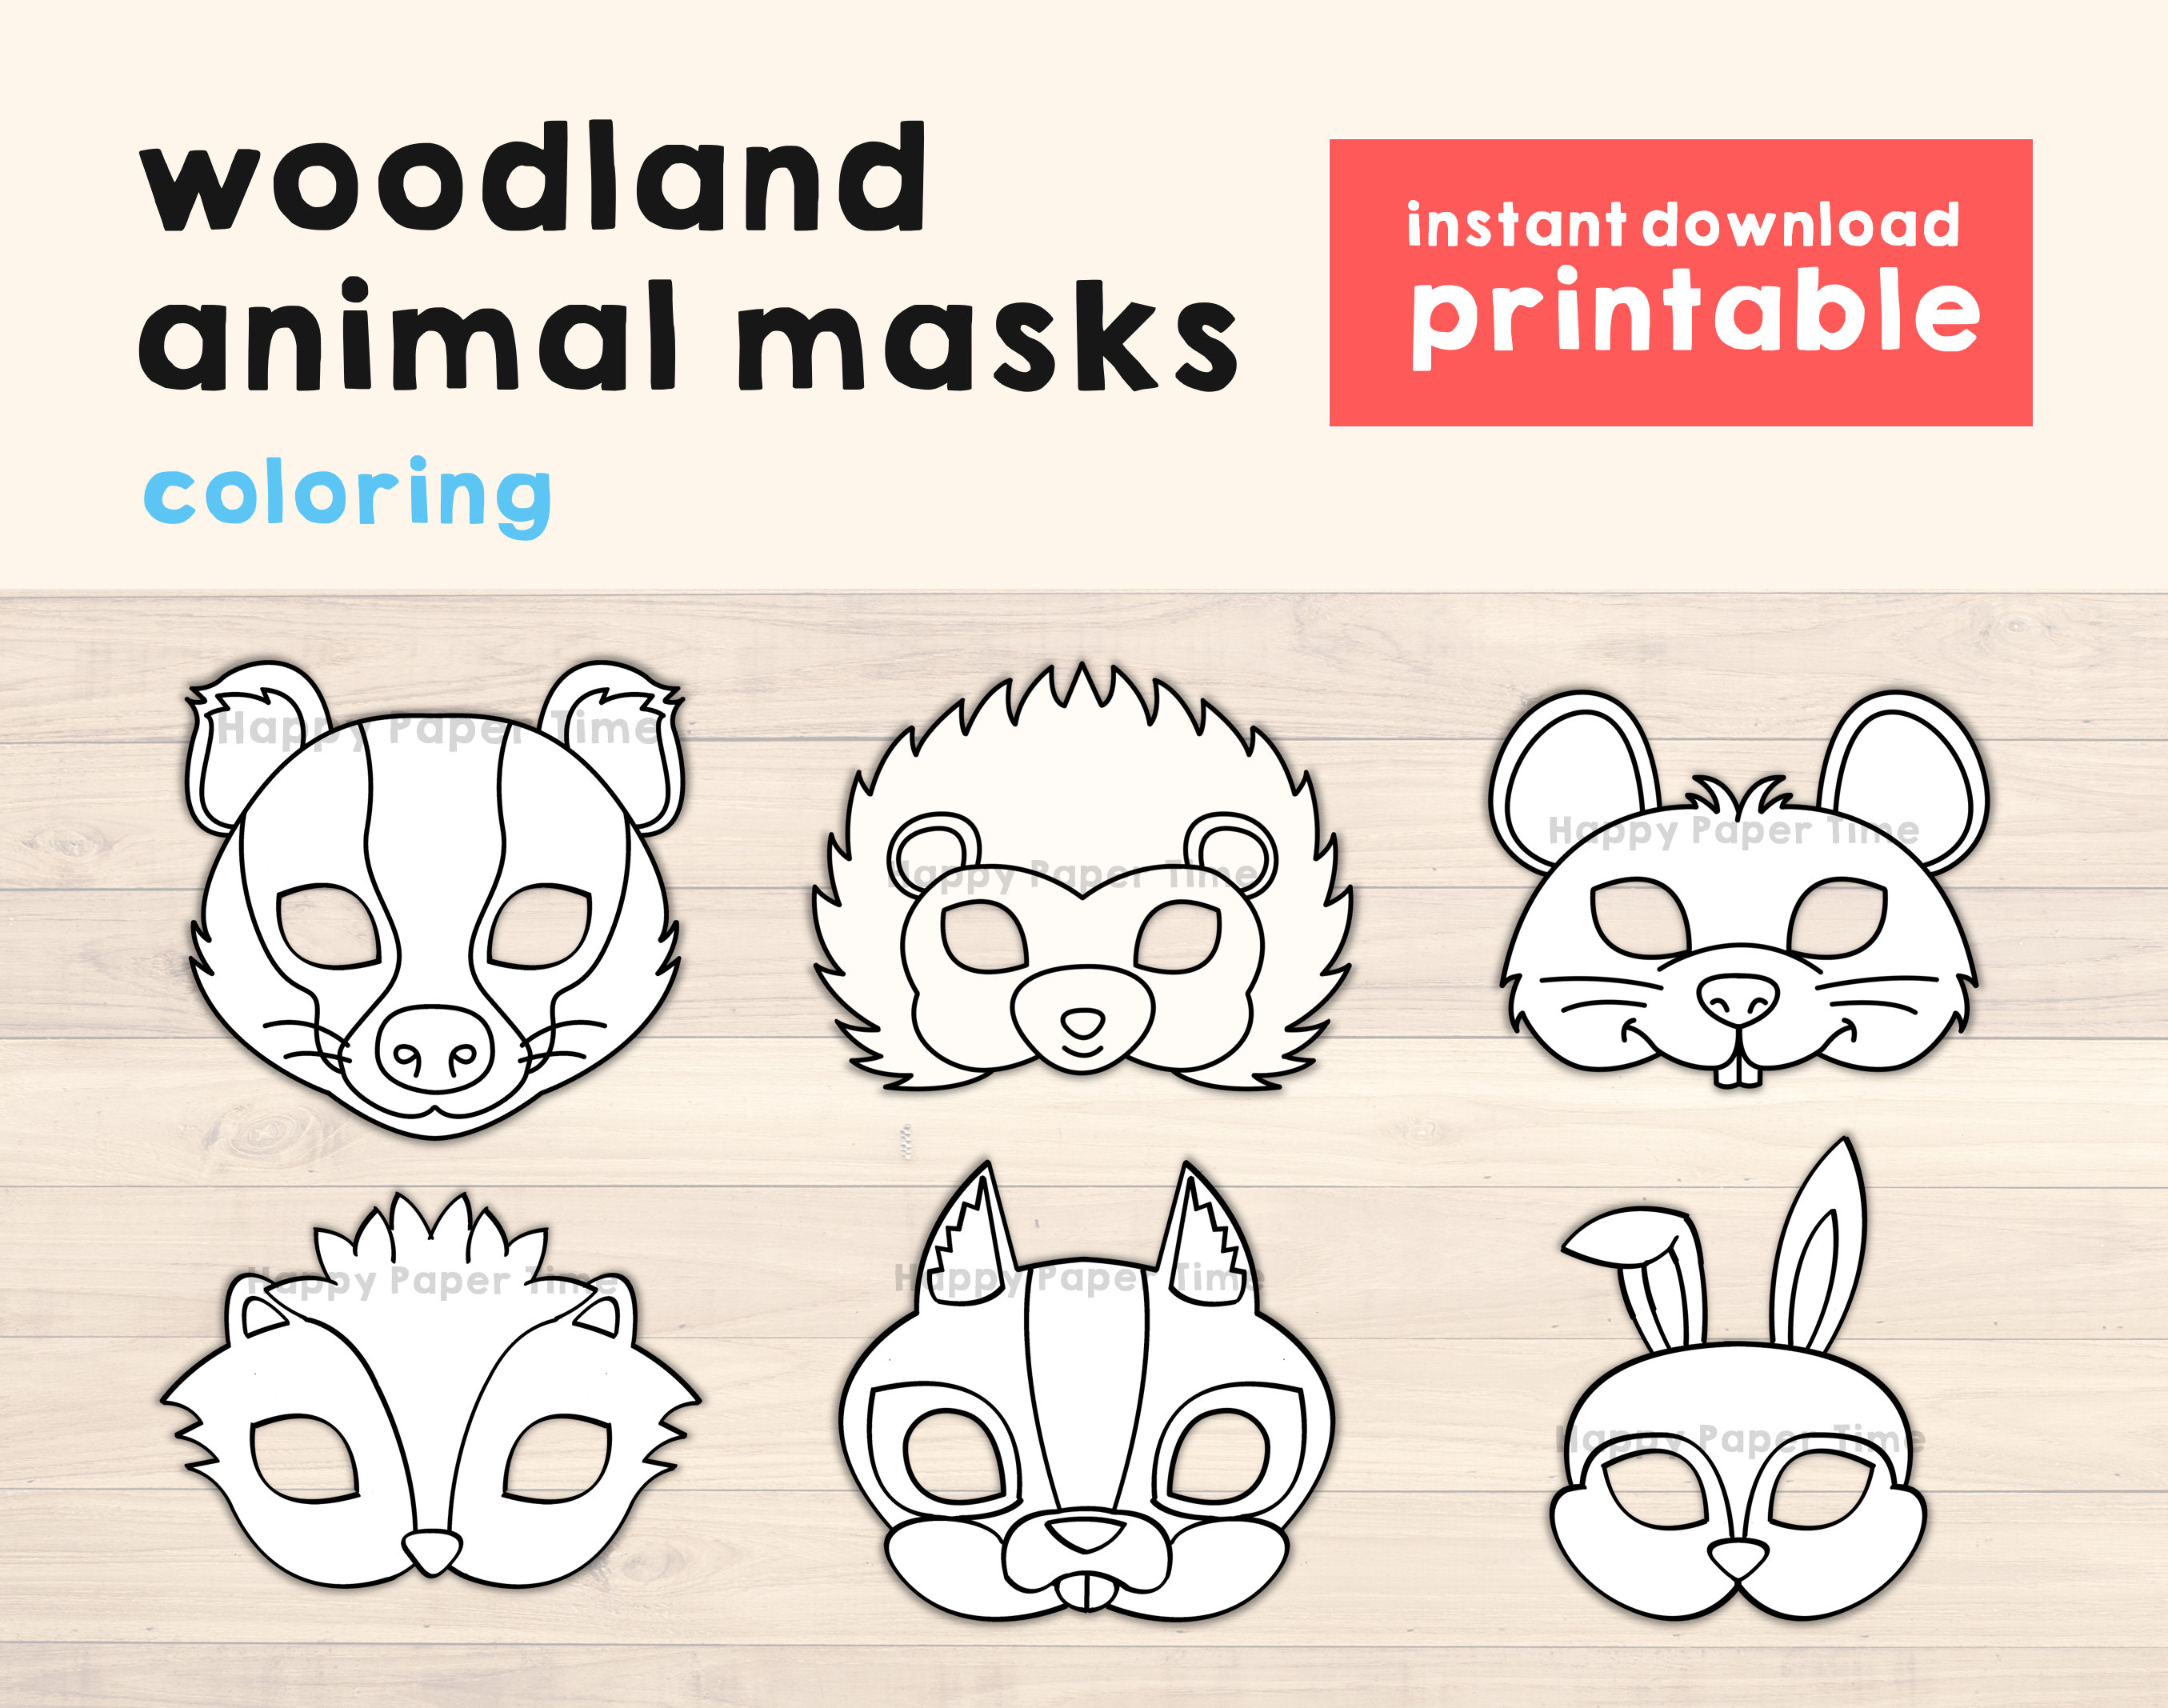 Animal Mask Activity, Pages